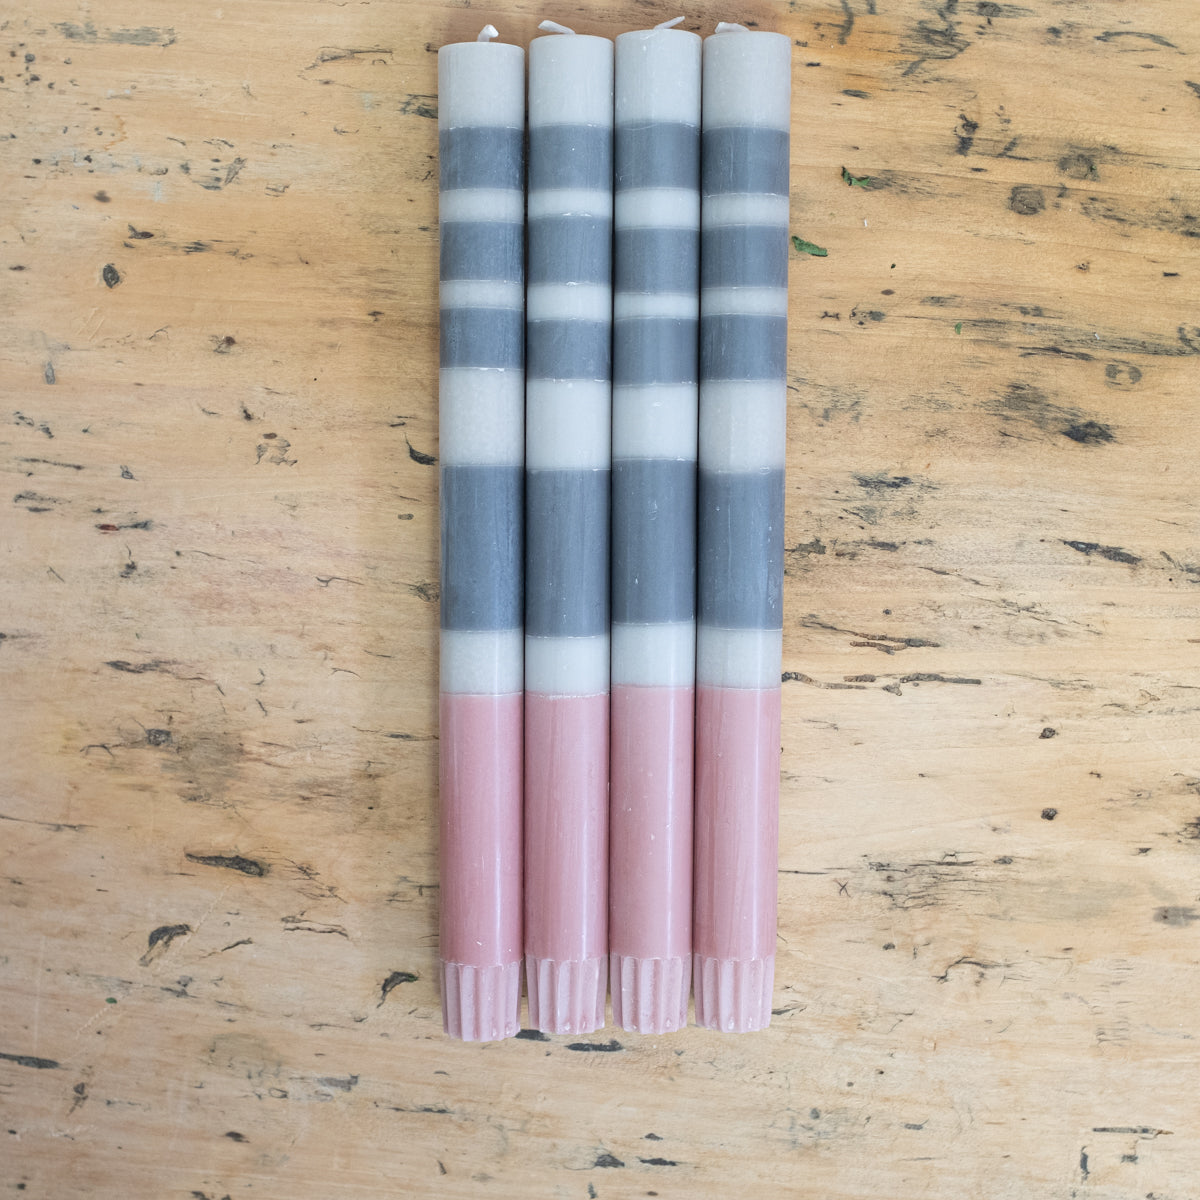 blue, gray and pink striped candles